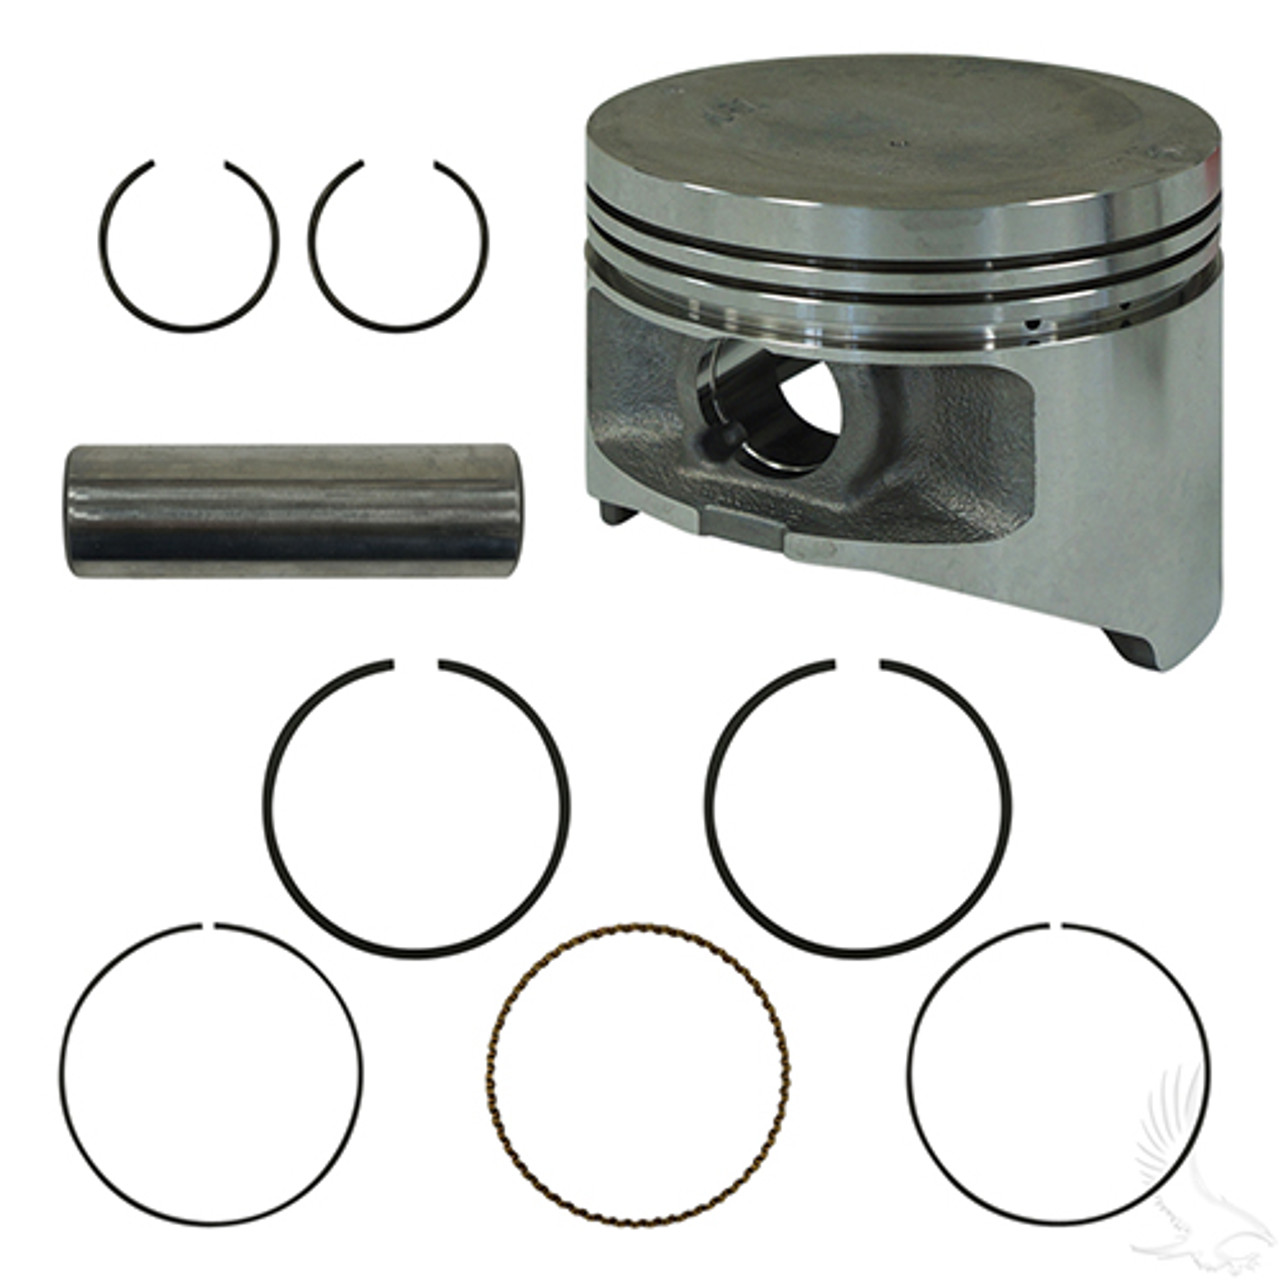 Piston and Ring Assembly, .25mm for Yamaha G22, G29/Drive Gas 2003-Up Golf Cart, ENG-262, JR7-11635-KIT, 9380